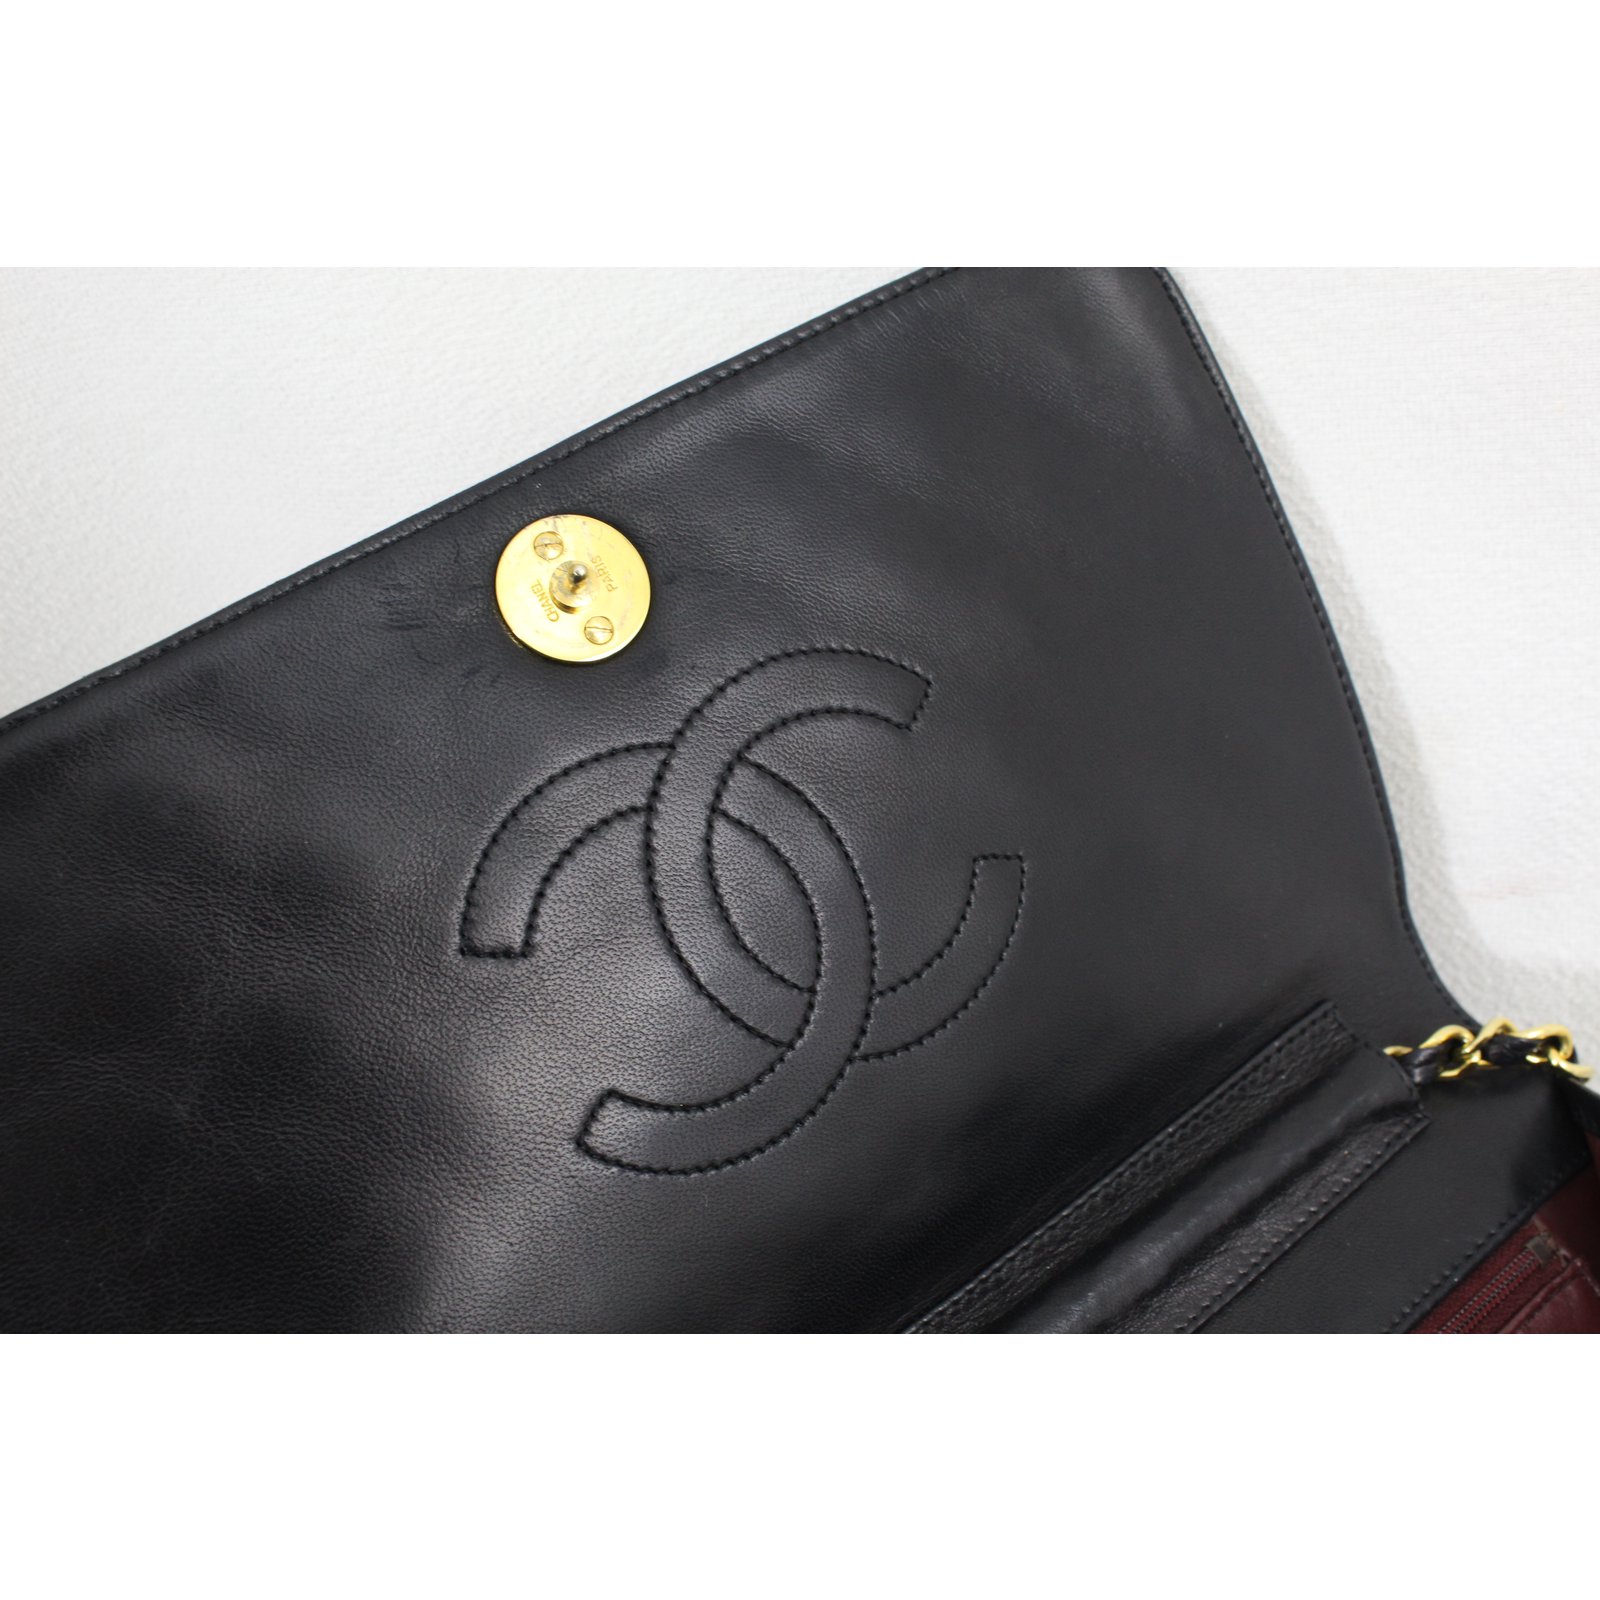 CHANEL Wallet On Chain Patent Leather Shoulder Crossbody Bag-US